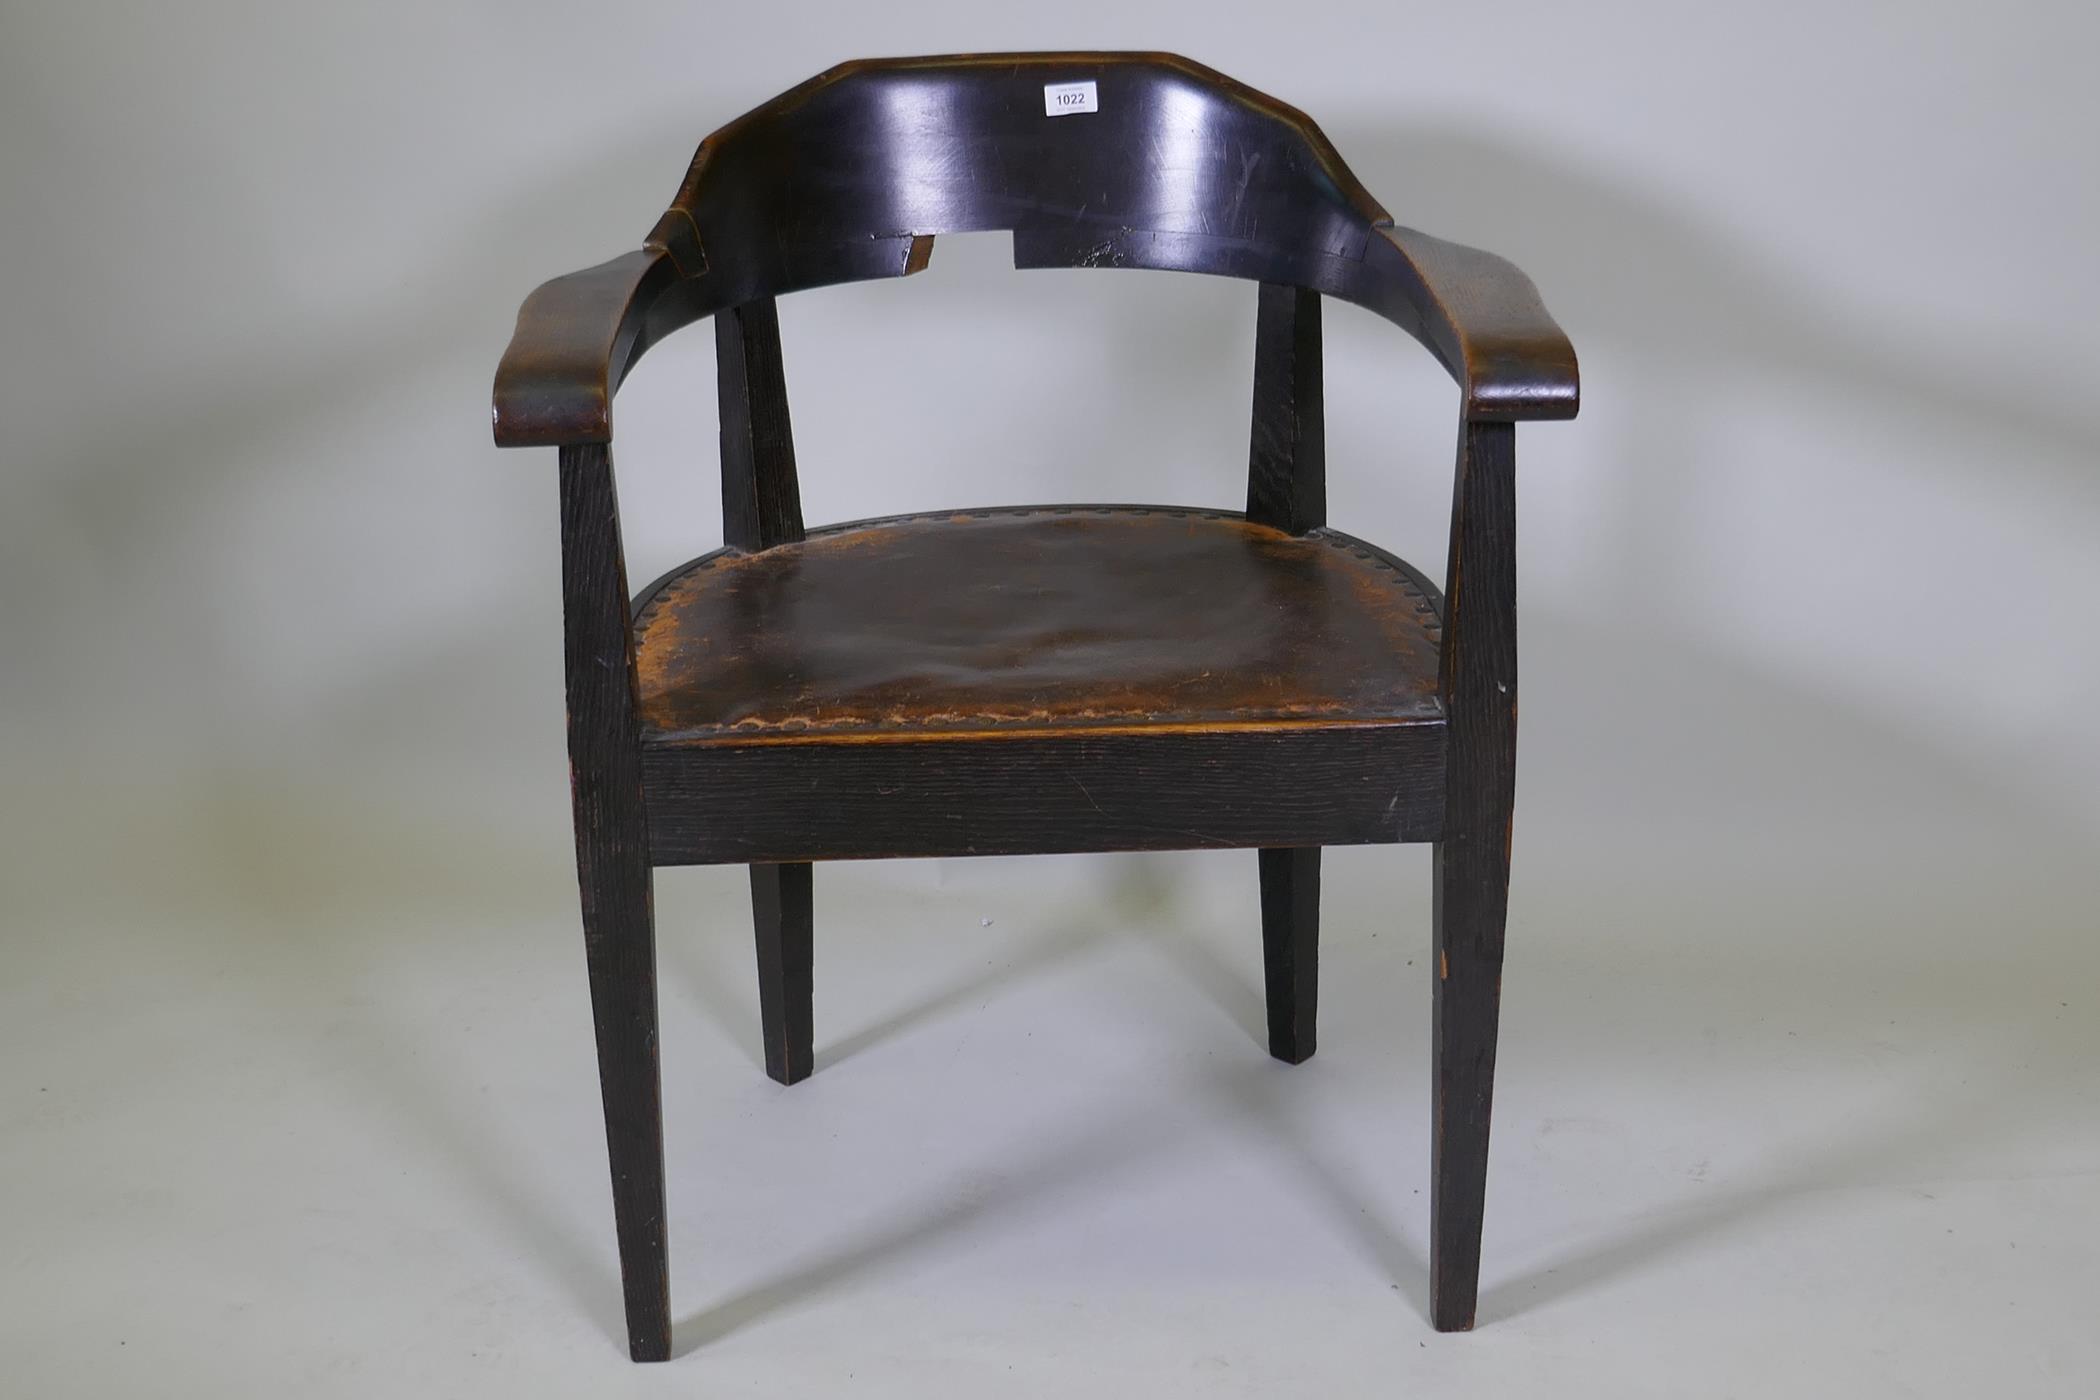 A late C19th/early C20th German oak tub chair with leather studded seat - Image 2 of 4